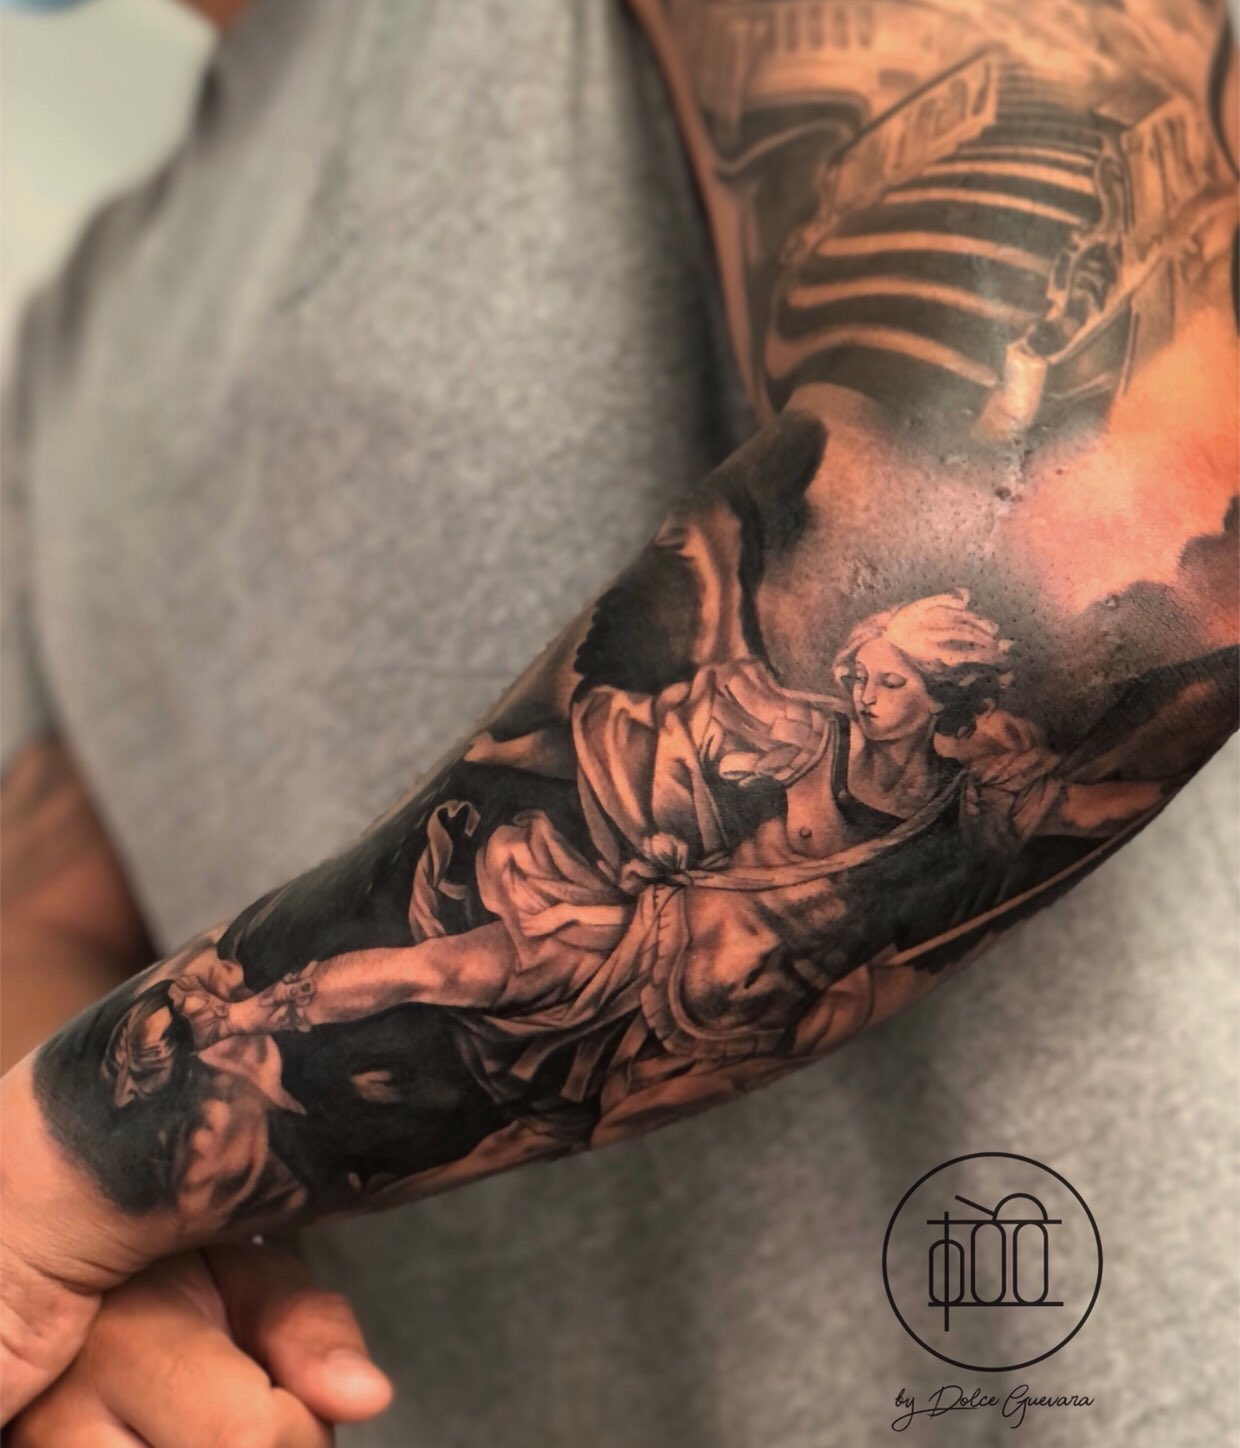 Full-sleeve St. Michael tattoo with black ink